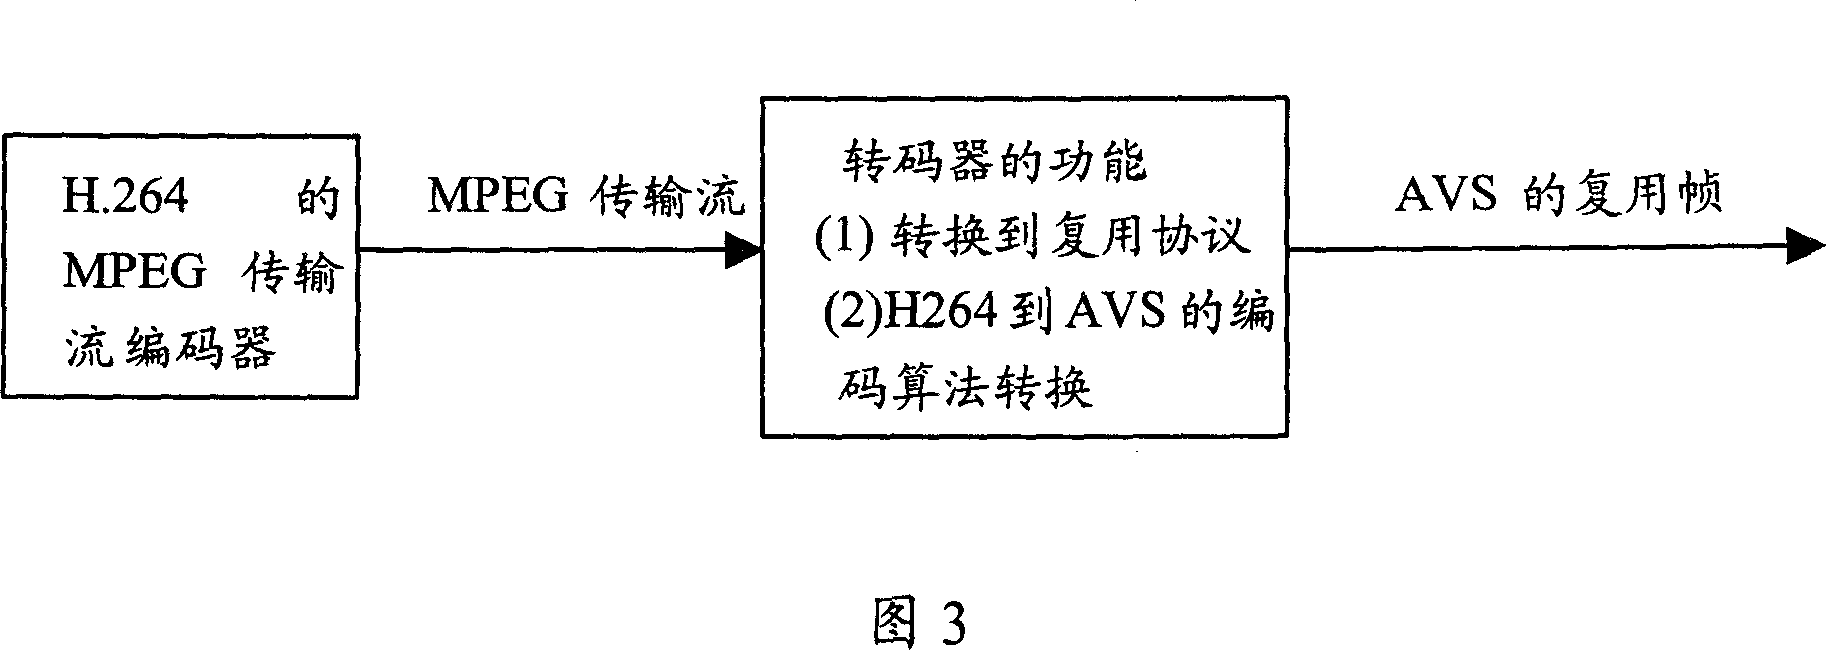 Conversion method of multiplexing protocols in broadcast network